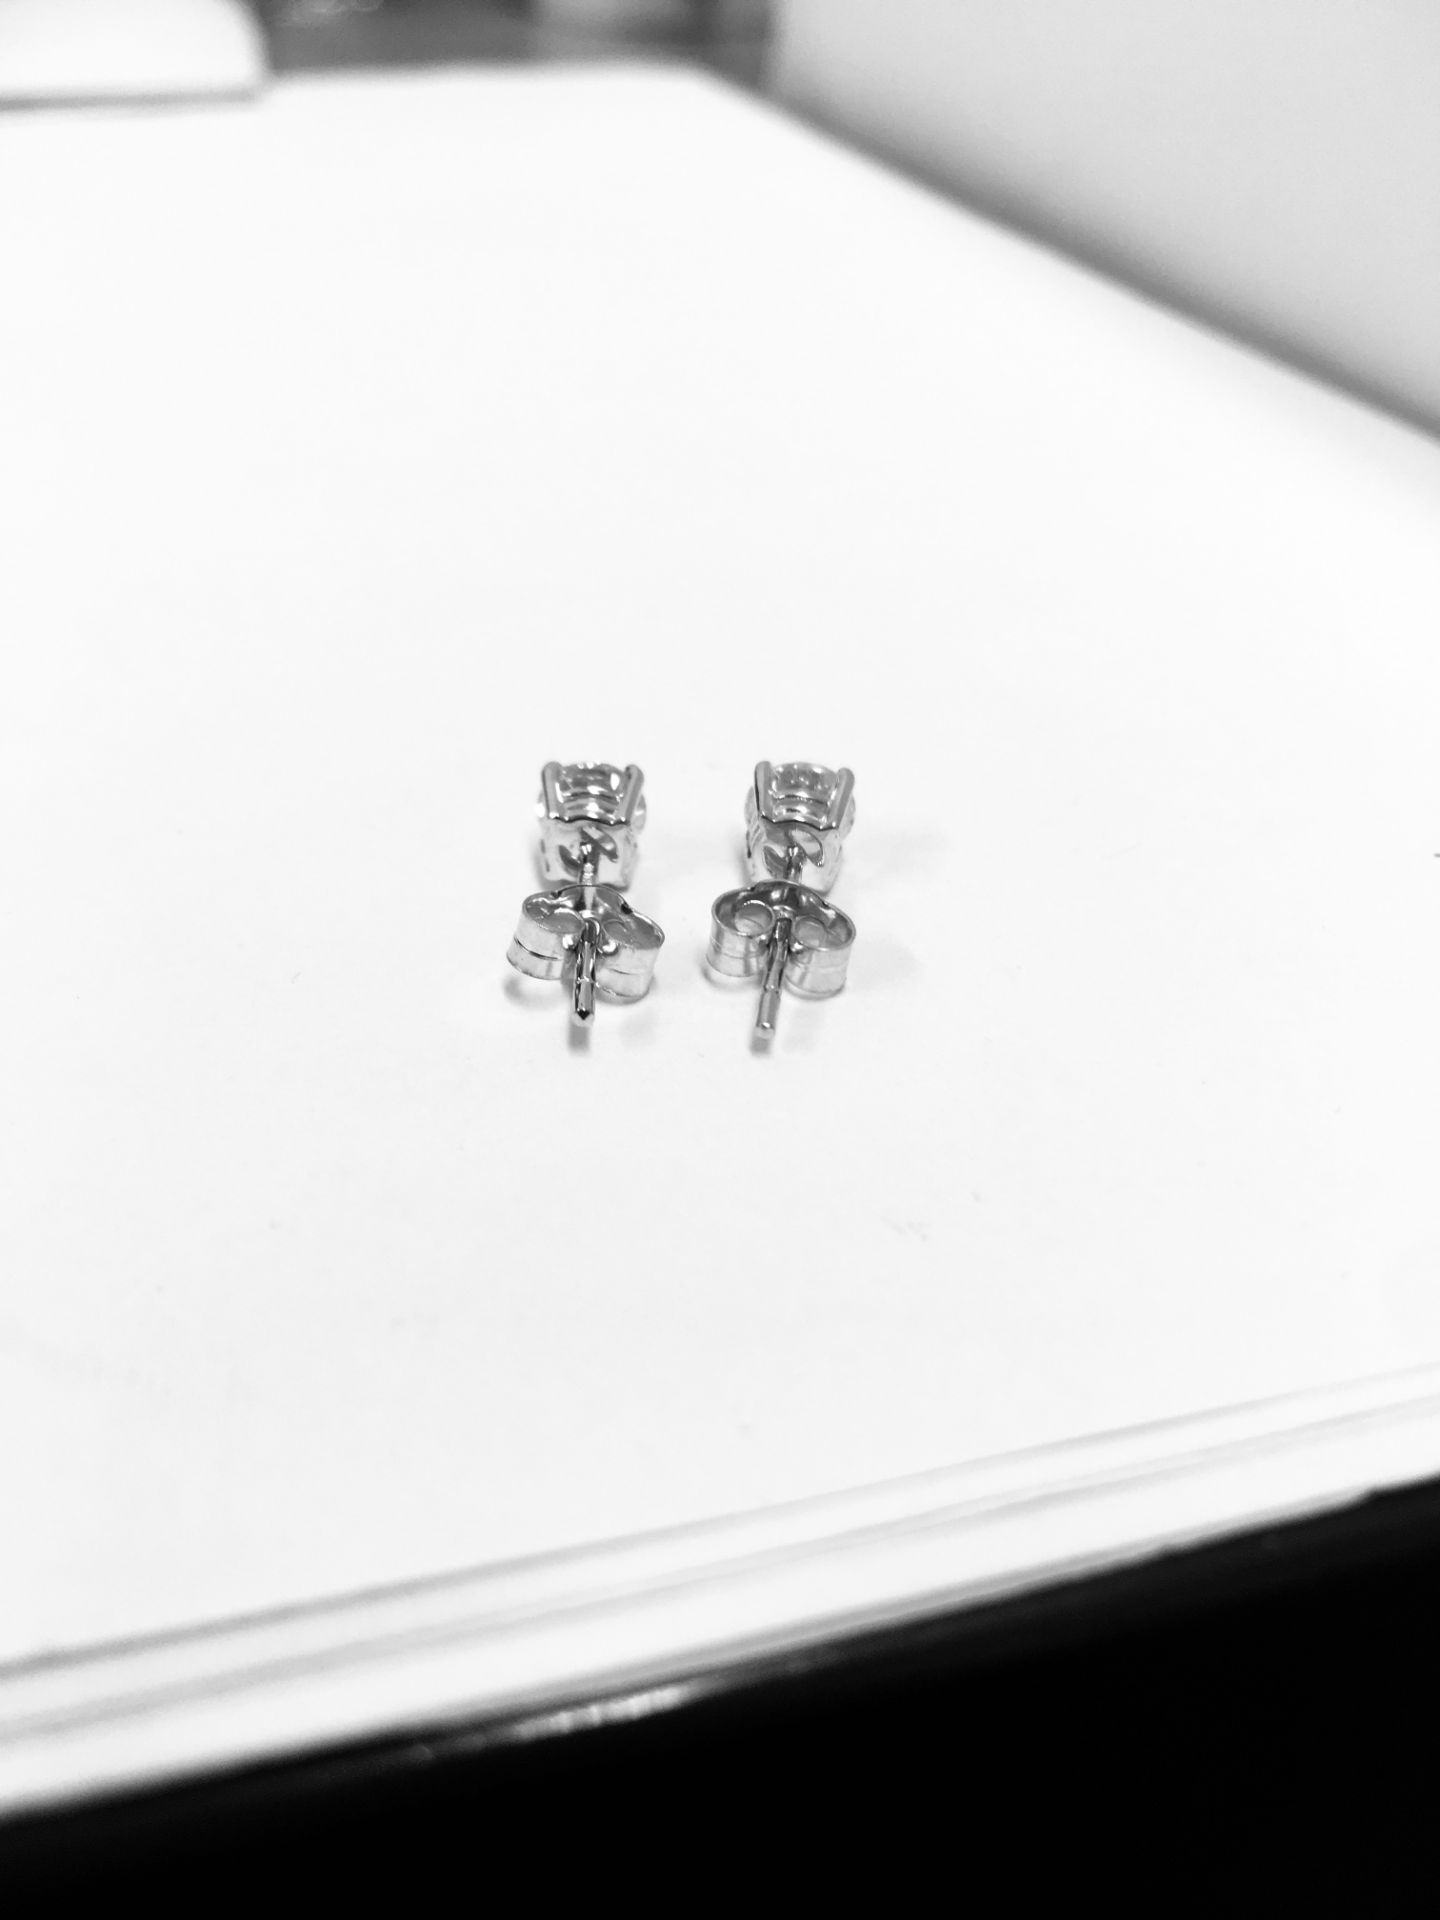 1.00Ct Diamond Solitaire Earrings Set In 18Ct White Gold. - Image 11 of 18